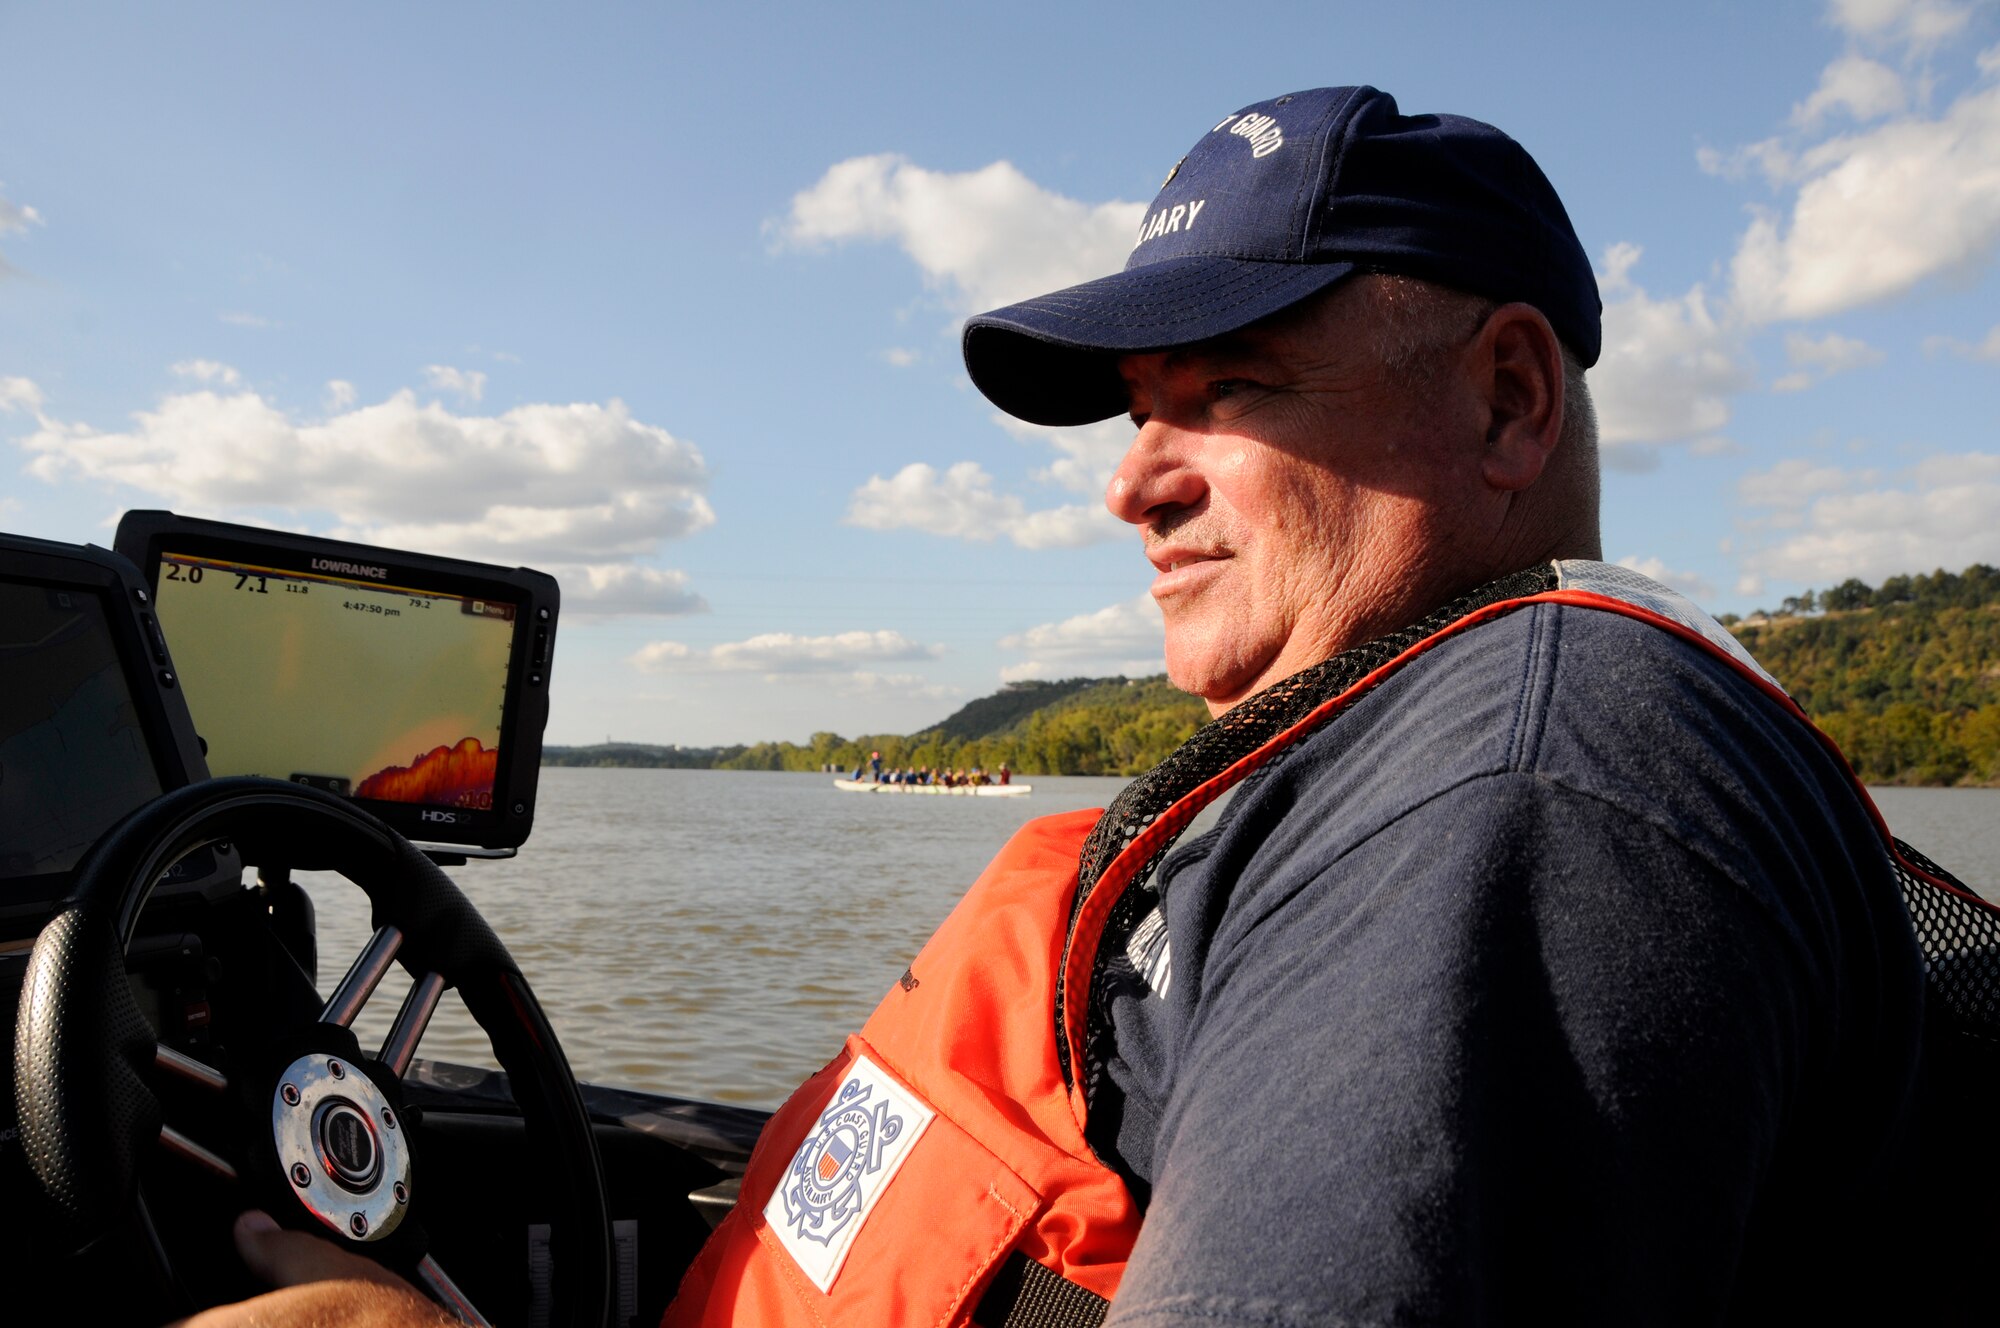 Jodie Haralson, U.S. Coast Guard Auxiliary volunteer, patrols the Arkansas River as a team practices a run on a dragon boat, Oct. 6, 2015, Fort Smith Ark. Haralson is vice commander of Flotilla 15-5, Fort Smith, and is a master sergeant assigned to the 188th Communications Flight where he serves as the noncommissioned officer in charge of infrastructure. Haralson brings diverse experience and knowledge to the 188th Wing and Arkansas Air National Guard as he also previously served as a Marine. (U.S. Air National Guard photo by Staff Sgt. Hannah Dickerson/Released)